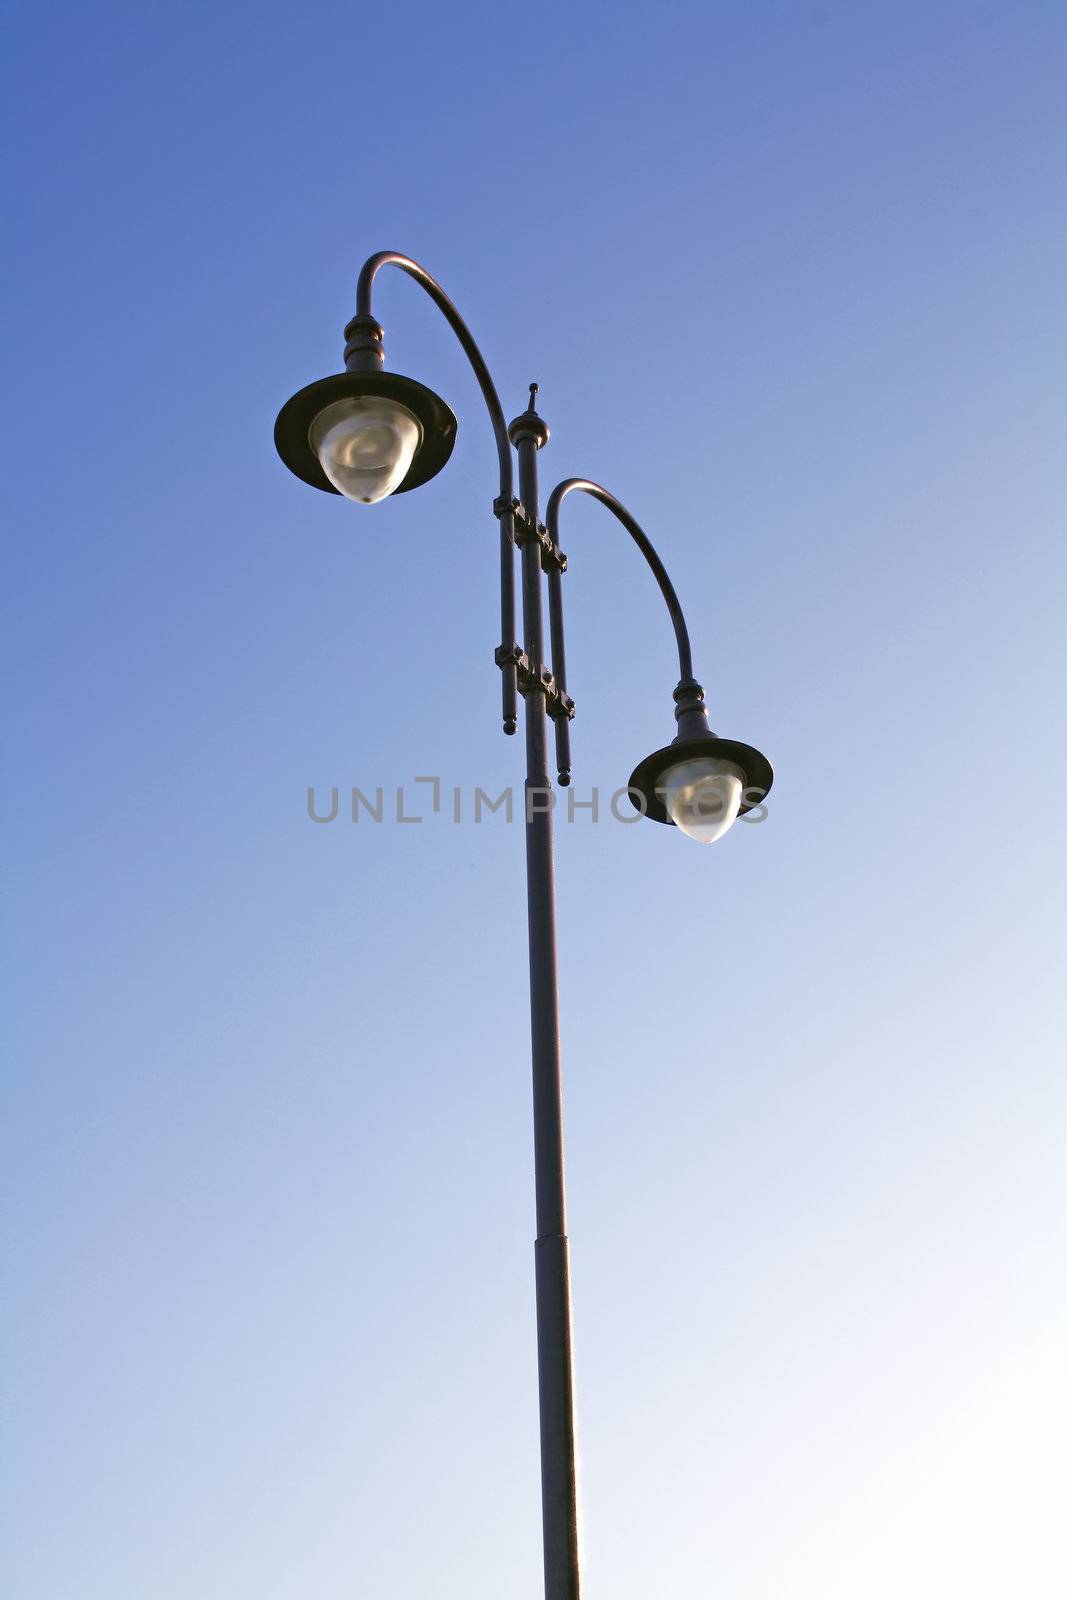 Street lamp by magraphics